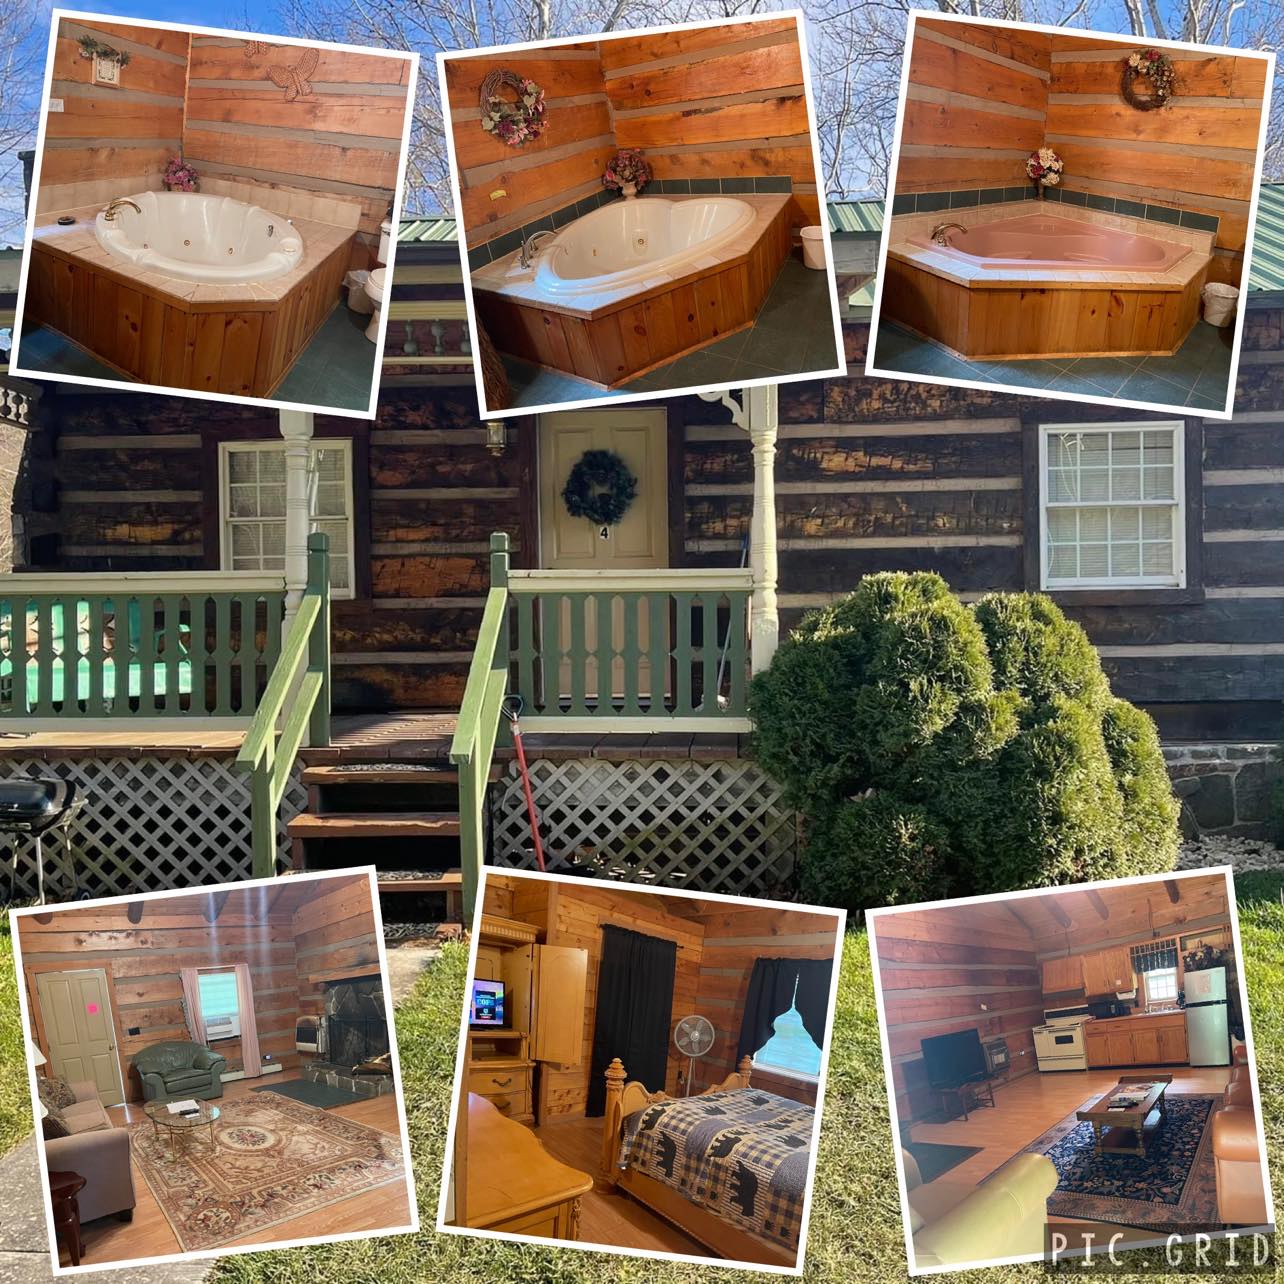 honeymoon cabins with jacuzzi hot tubs lodging in seneca rocks wv pendleton county west virginia tourism rustic cabin get away places to stay near seneca rocks smoke hole caverns dolly sods canaan valley vacation rentals pet friendly